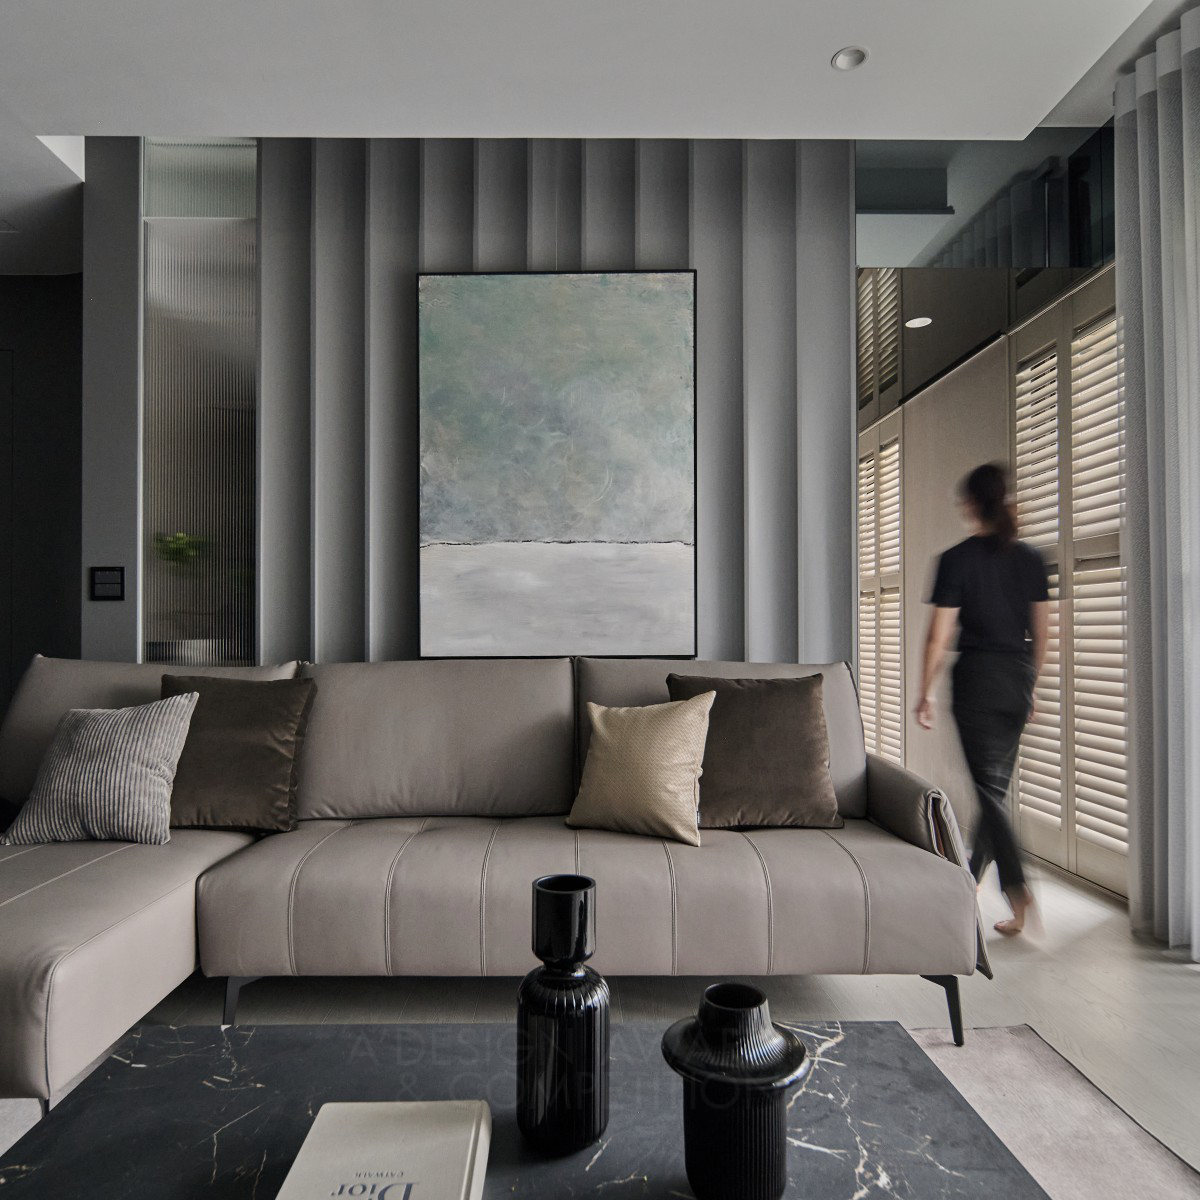 Wan Yu Lo wins Bronze at the prestigious A' Interior Space, Retail and Exhibition Design Award with Light Corridor in Grayness Residential Interior Design.